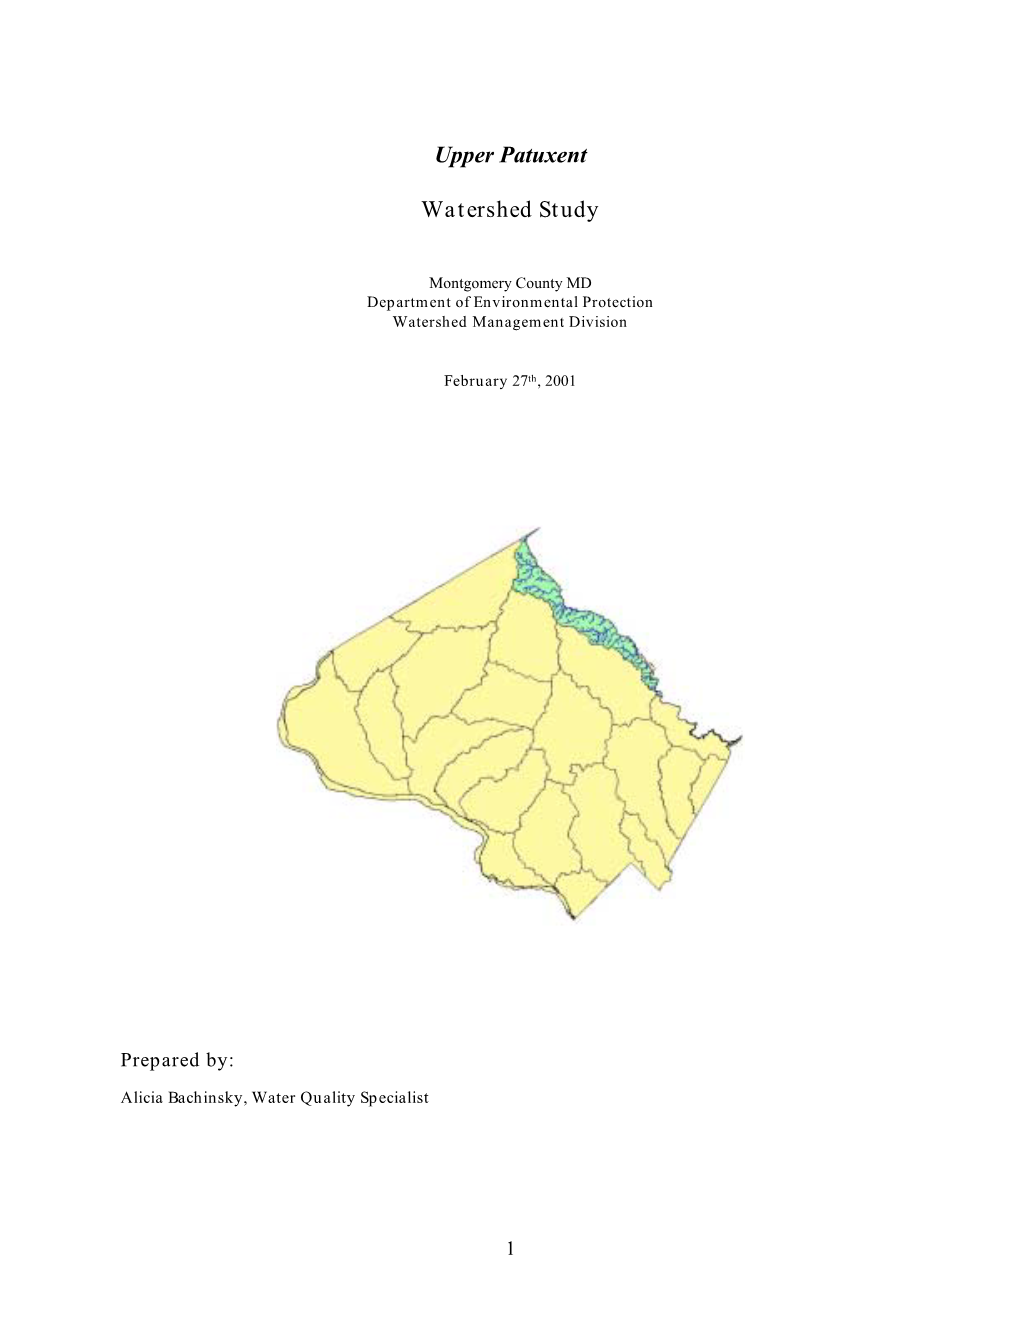 Upper Patuxent River Watershed